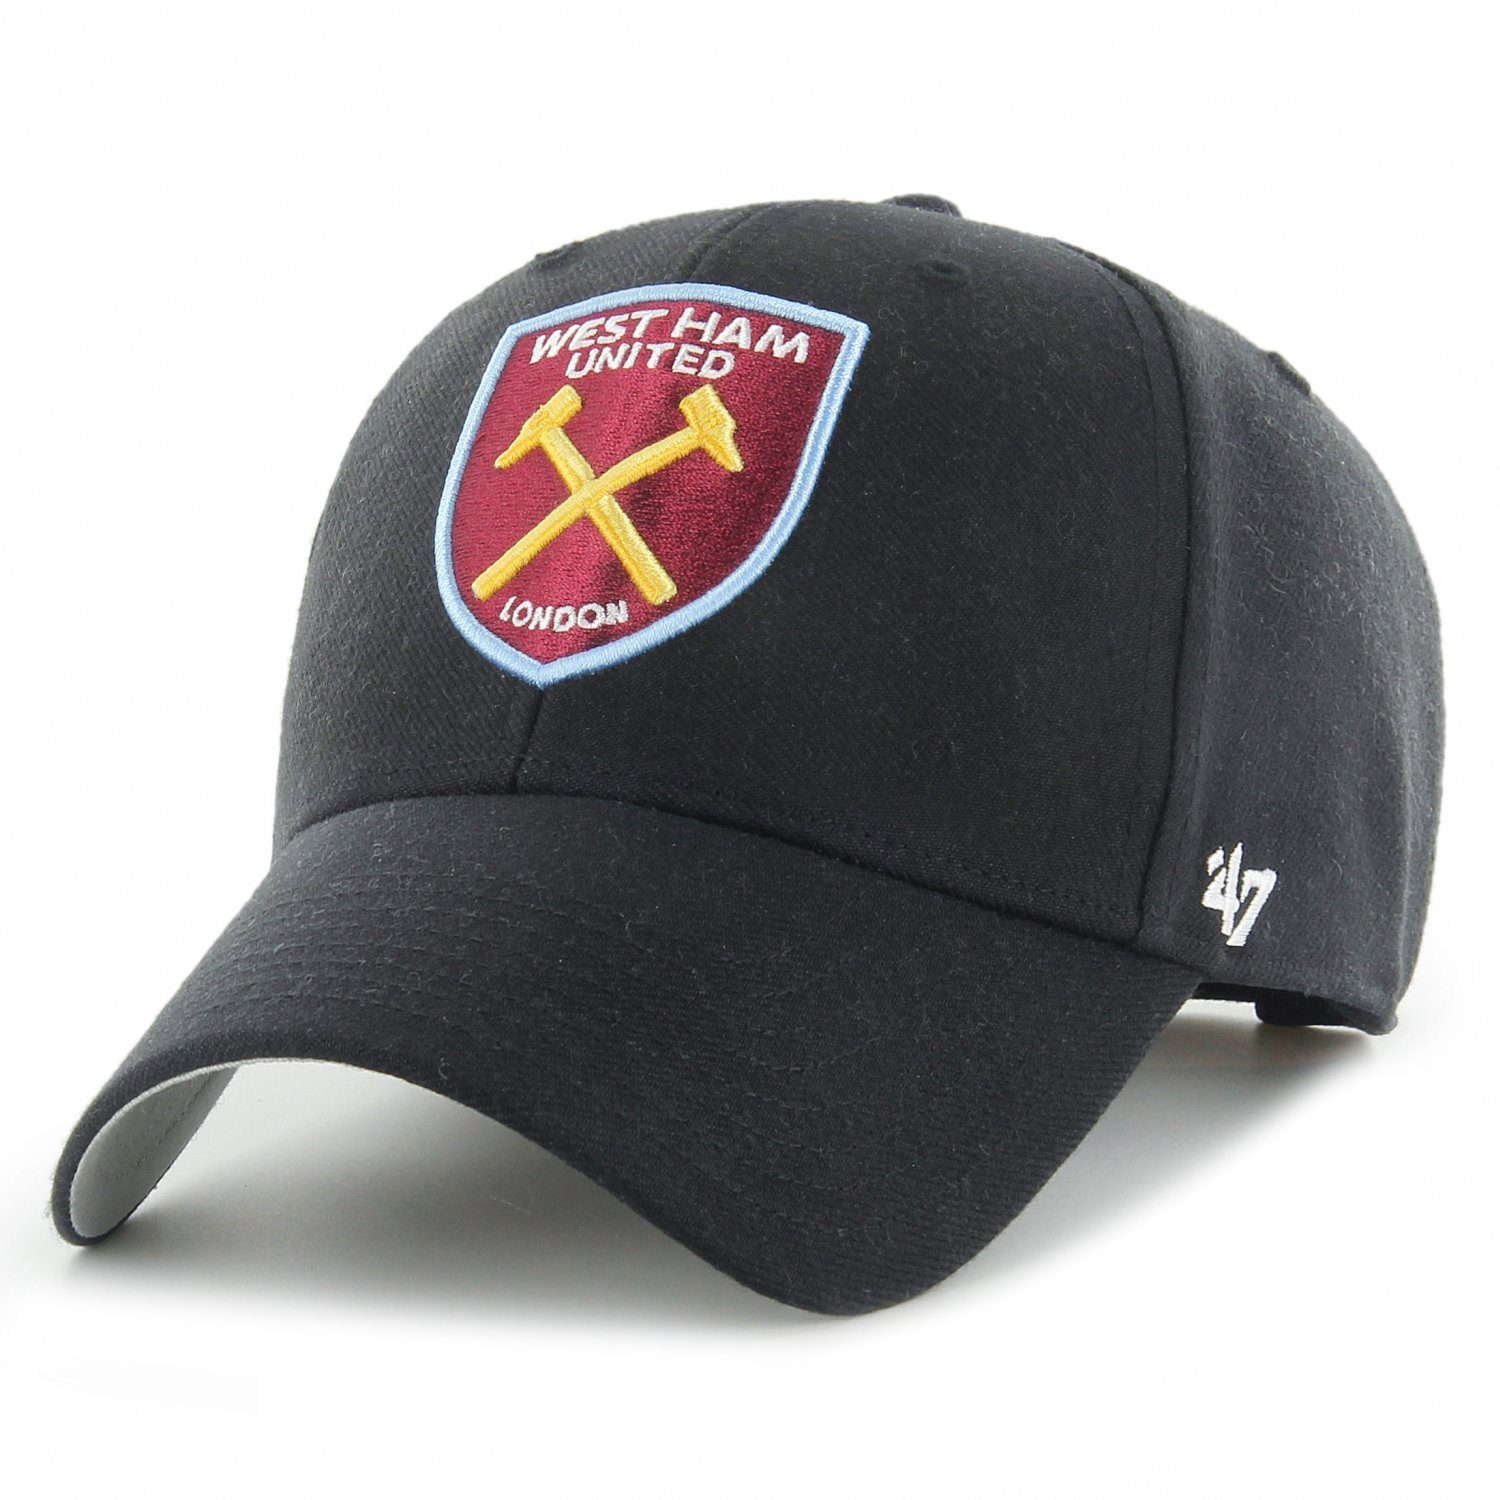 '47 Brand Trucker Cap Relaxed Fit West Ham United